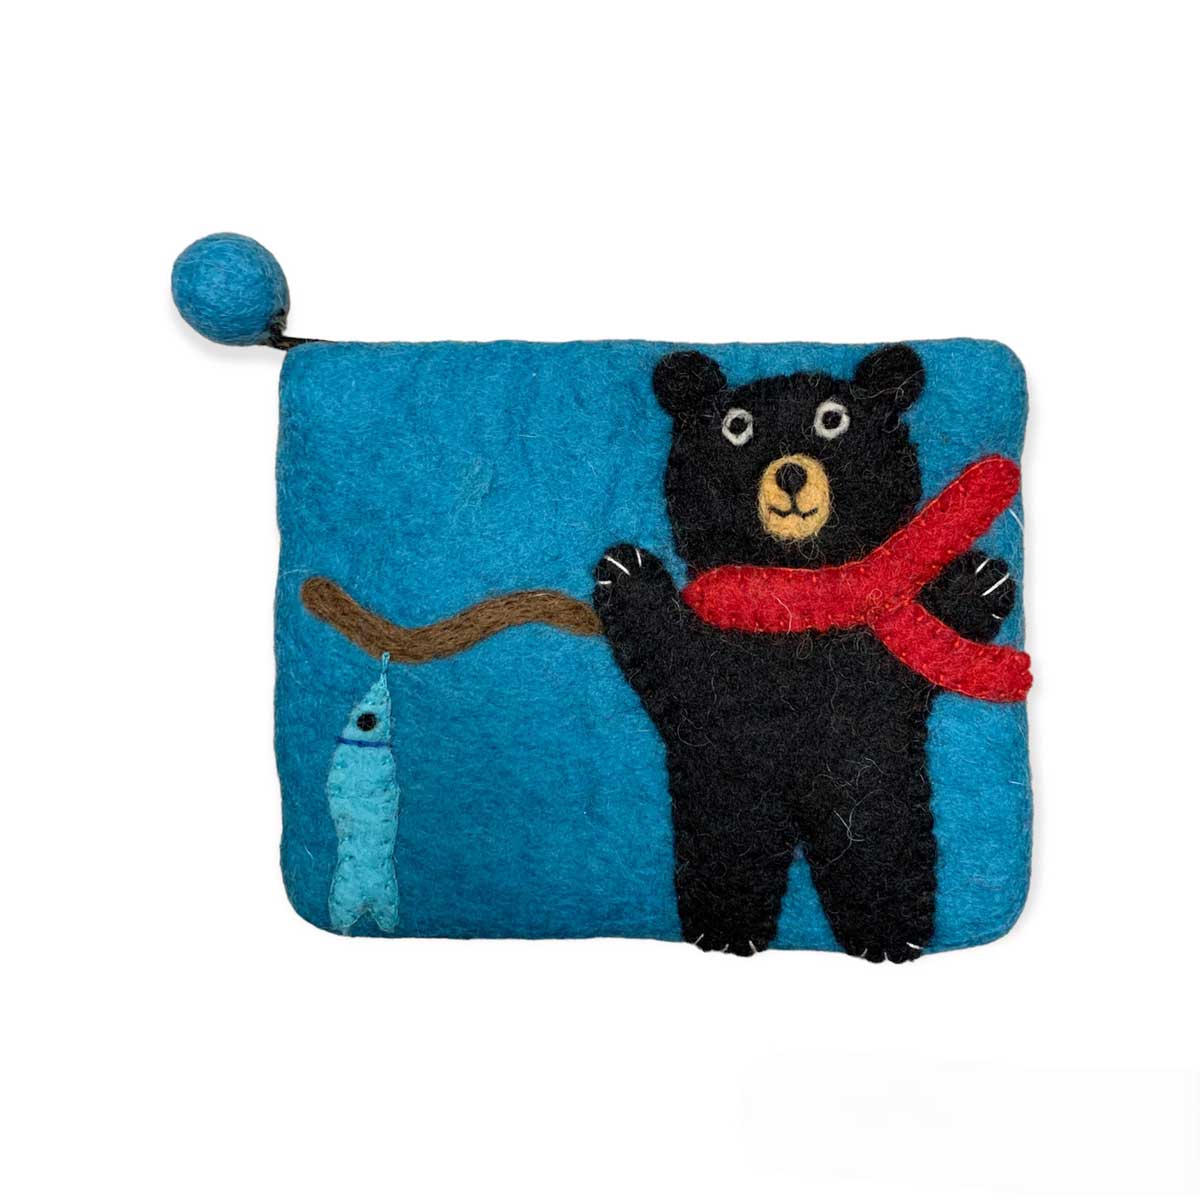 Felted Wool Bear with Fish Purse